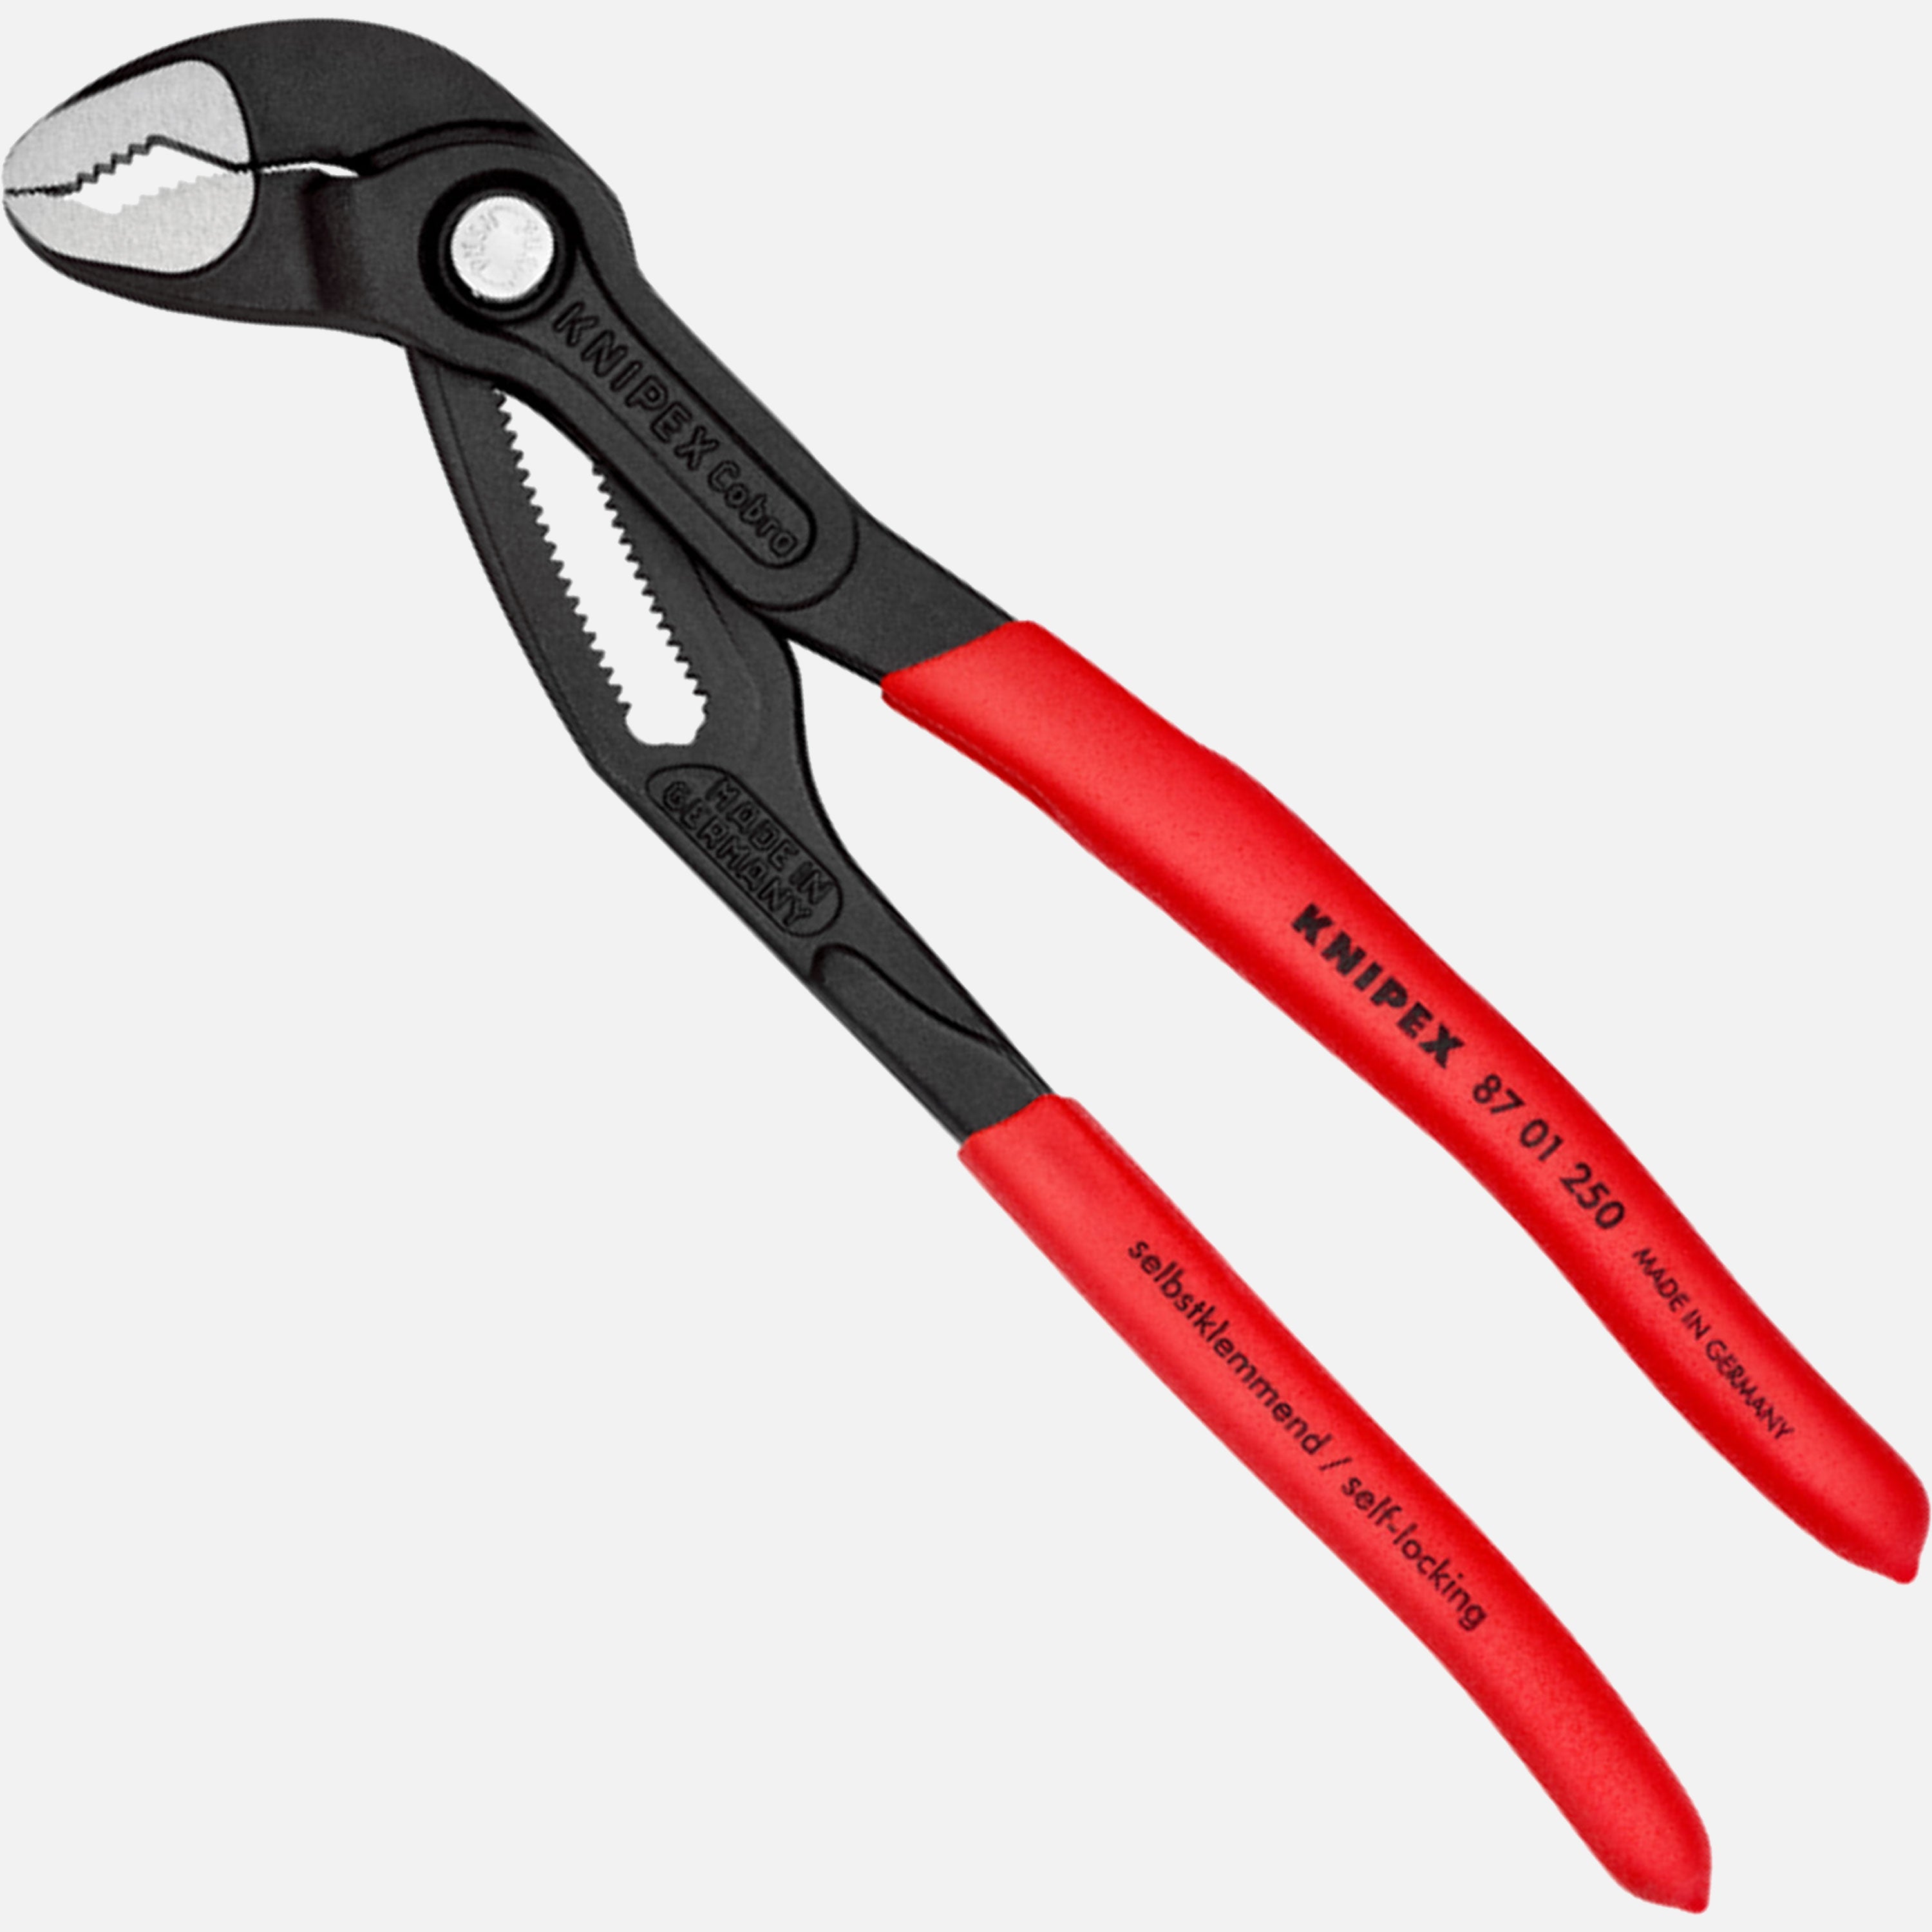 Knipex Cobra® XS Water Pump Pliers, 100 mm Overall, Angled, Straight Tip,  28mm Jaw